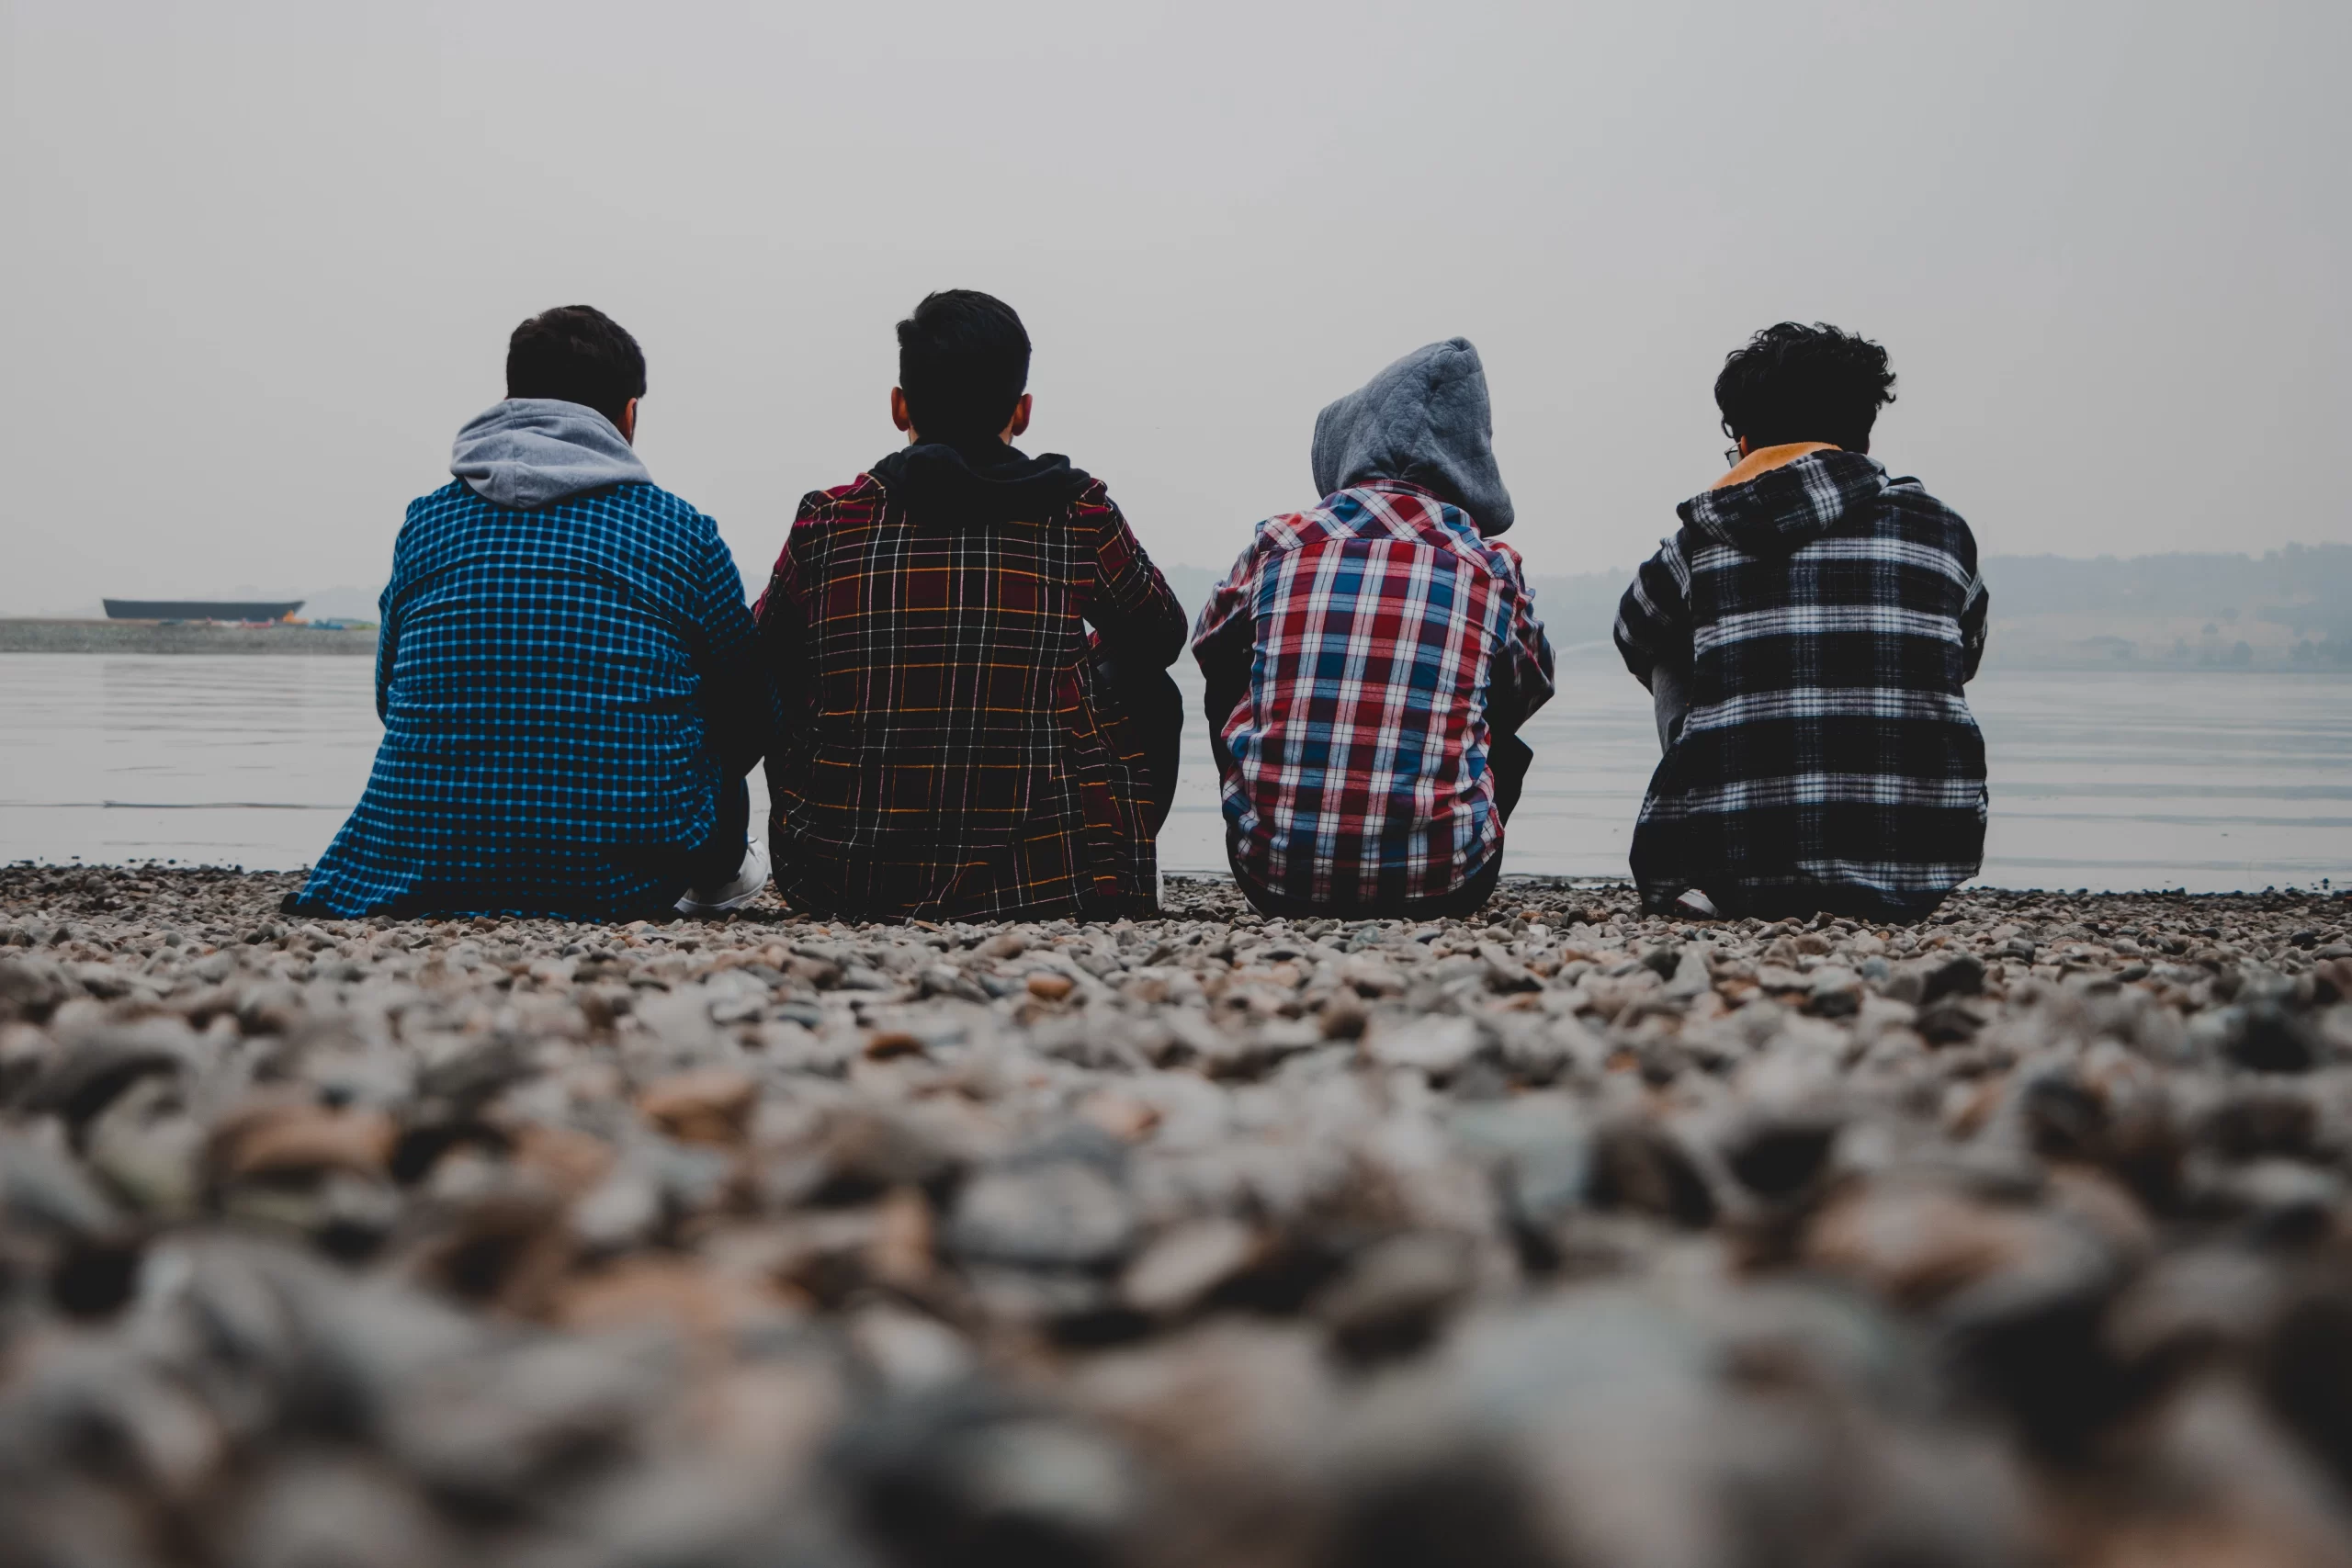 4 Teenage boys sitting on beach with backs to camera Tehran, Tehran Province, Iran<br />
Published on January 10, 2021<br />
Canon, EOS 90D<br />
Free to use under the Unsplash License